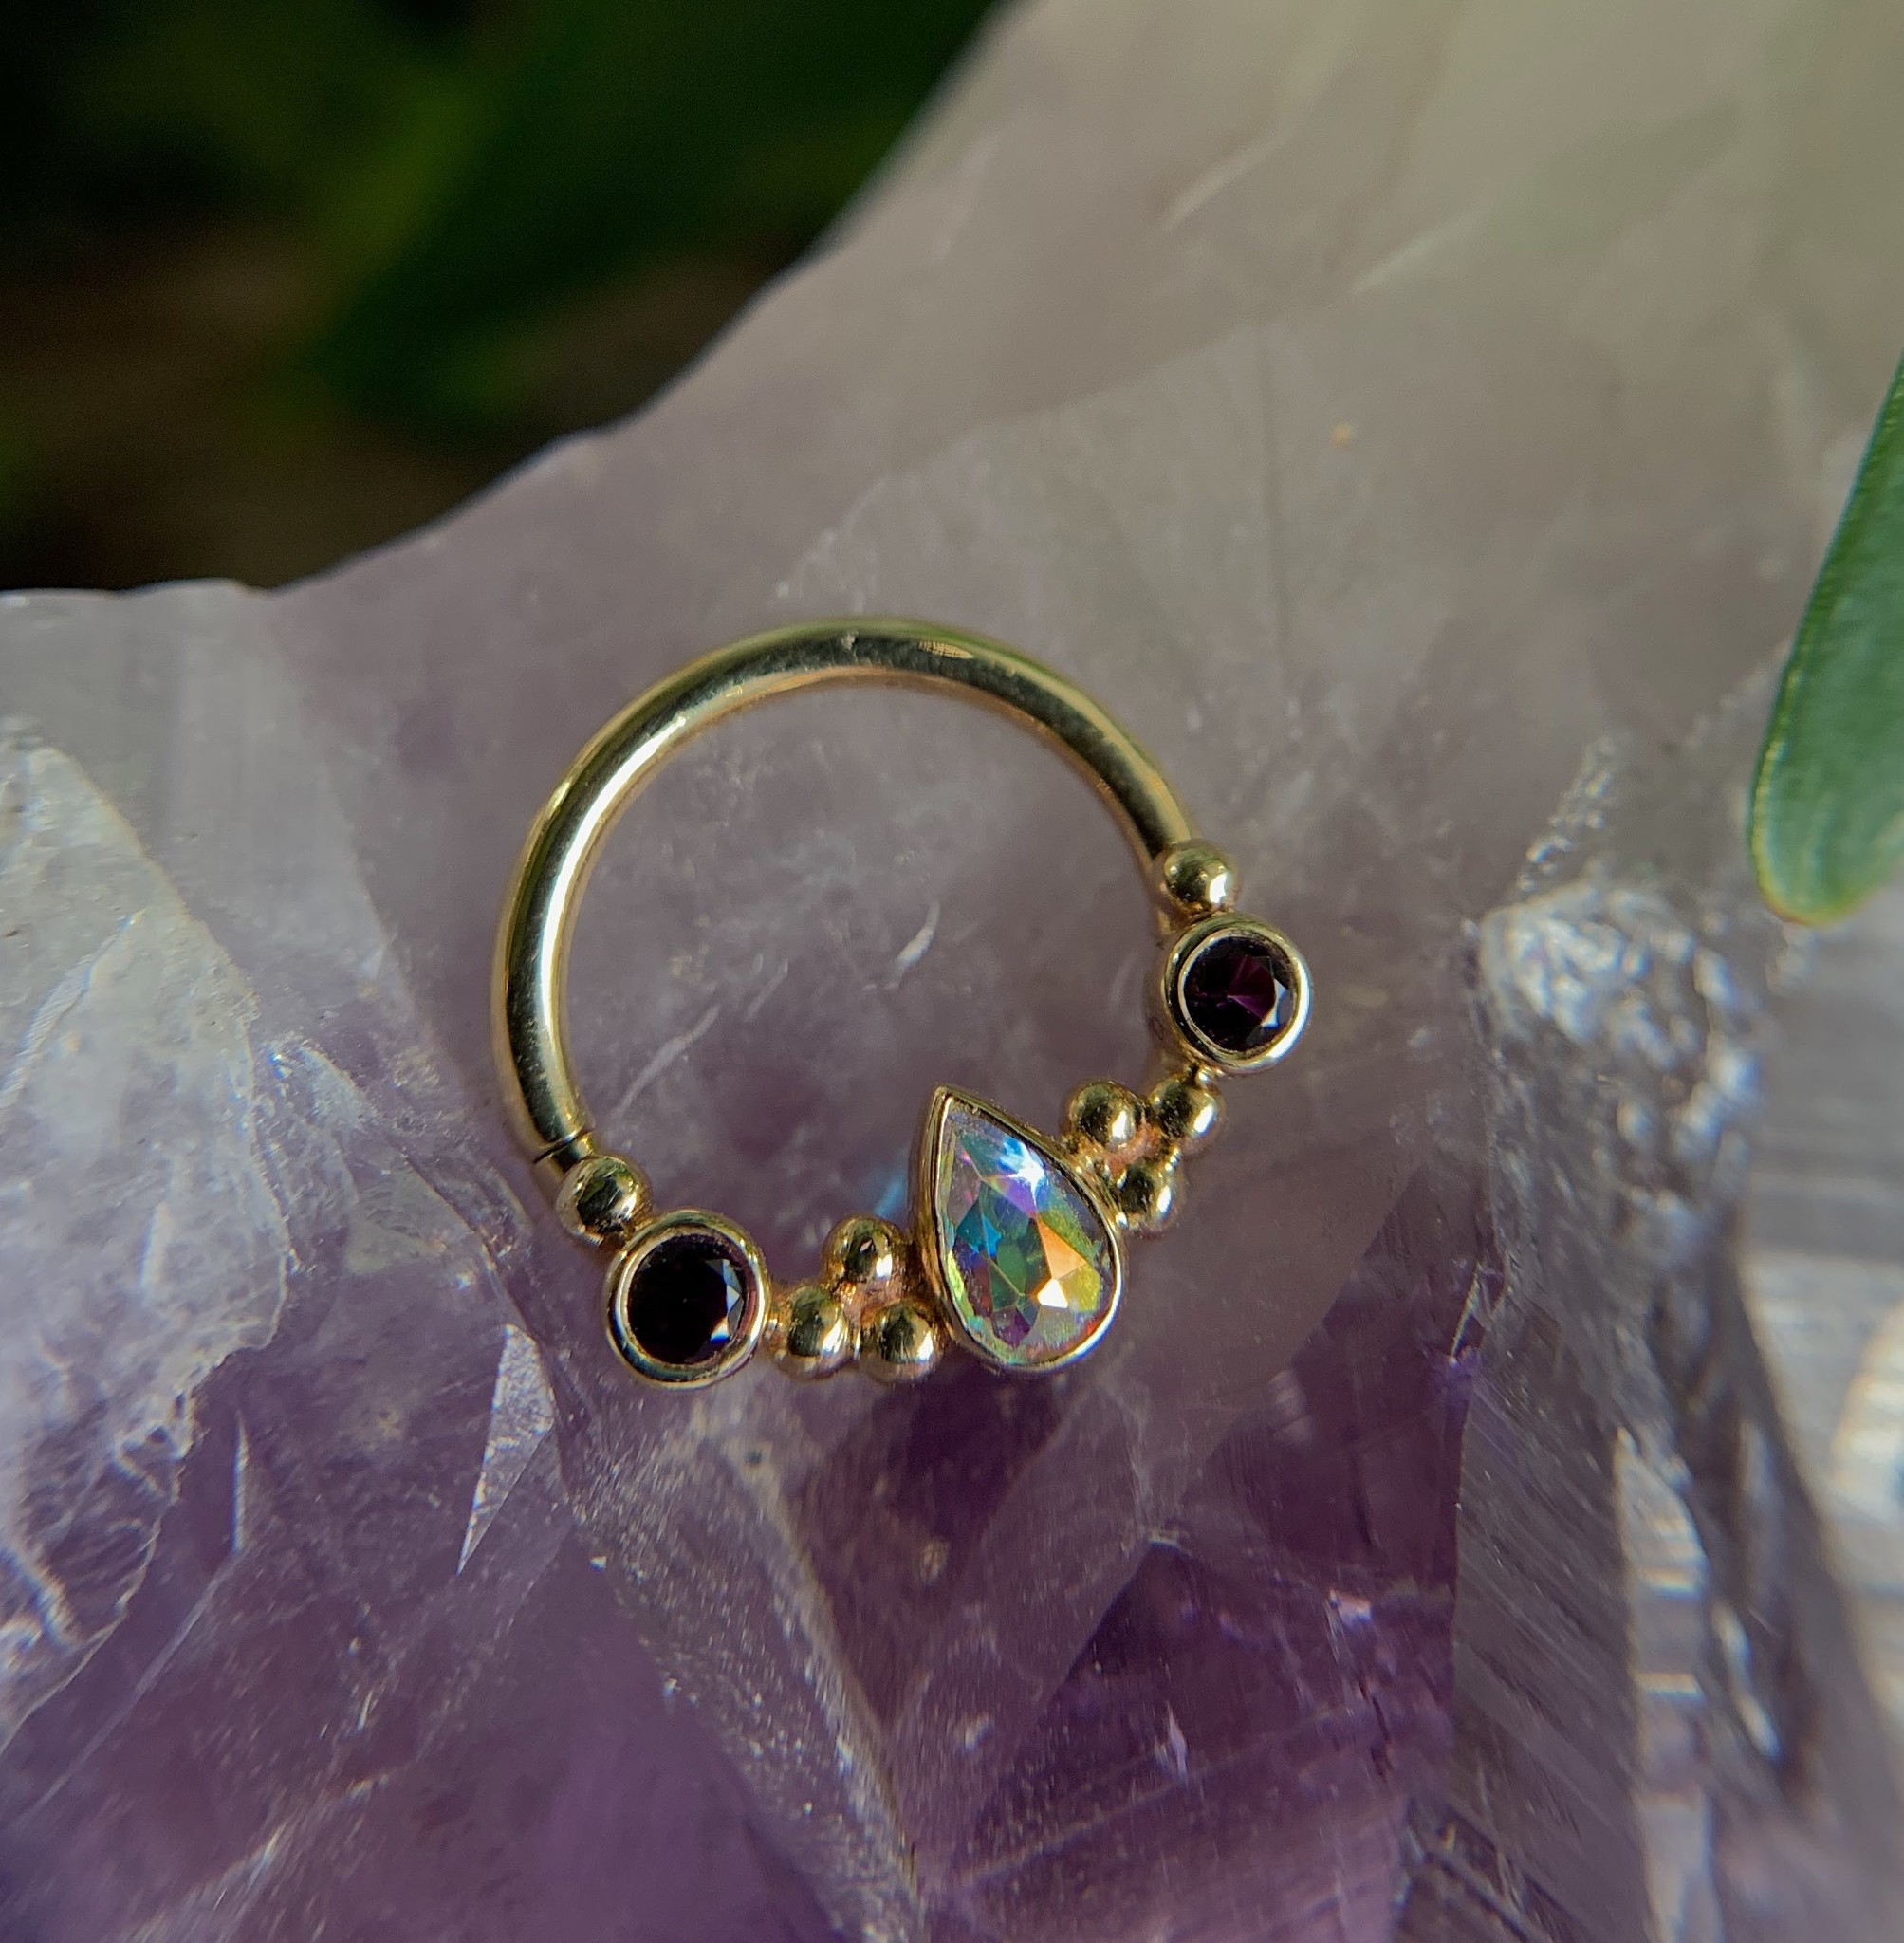 16g 3/8 "Inside Out Eden Pear" with Midnight Topaz & Mercury Mystic Topaz by BVLA